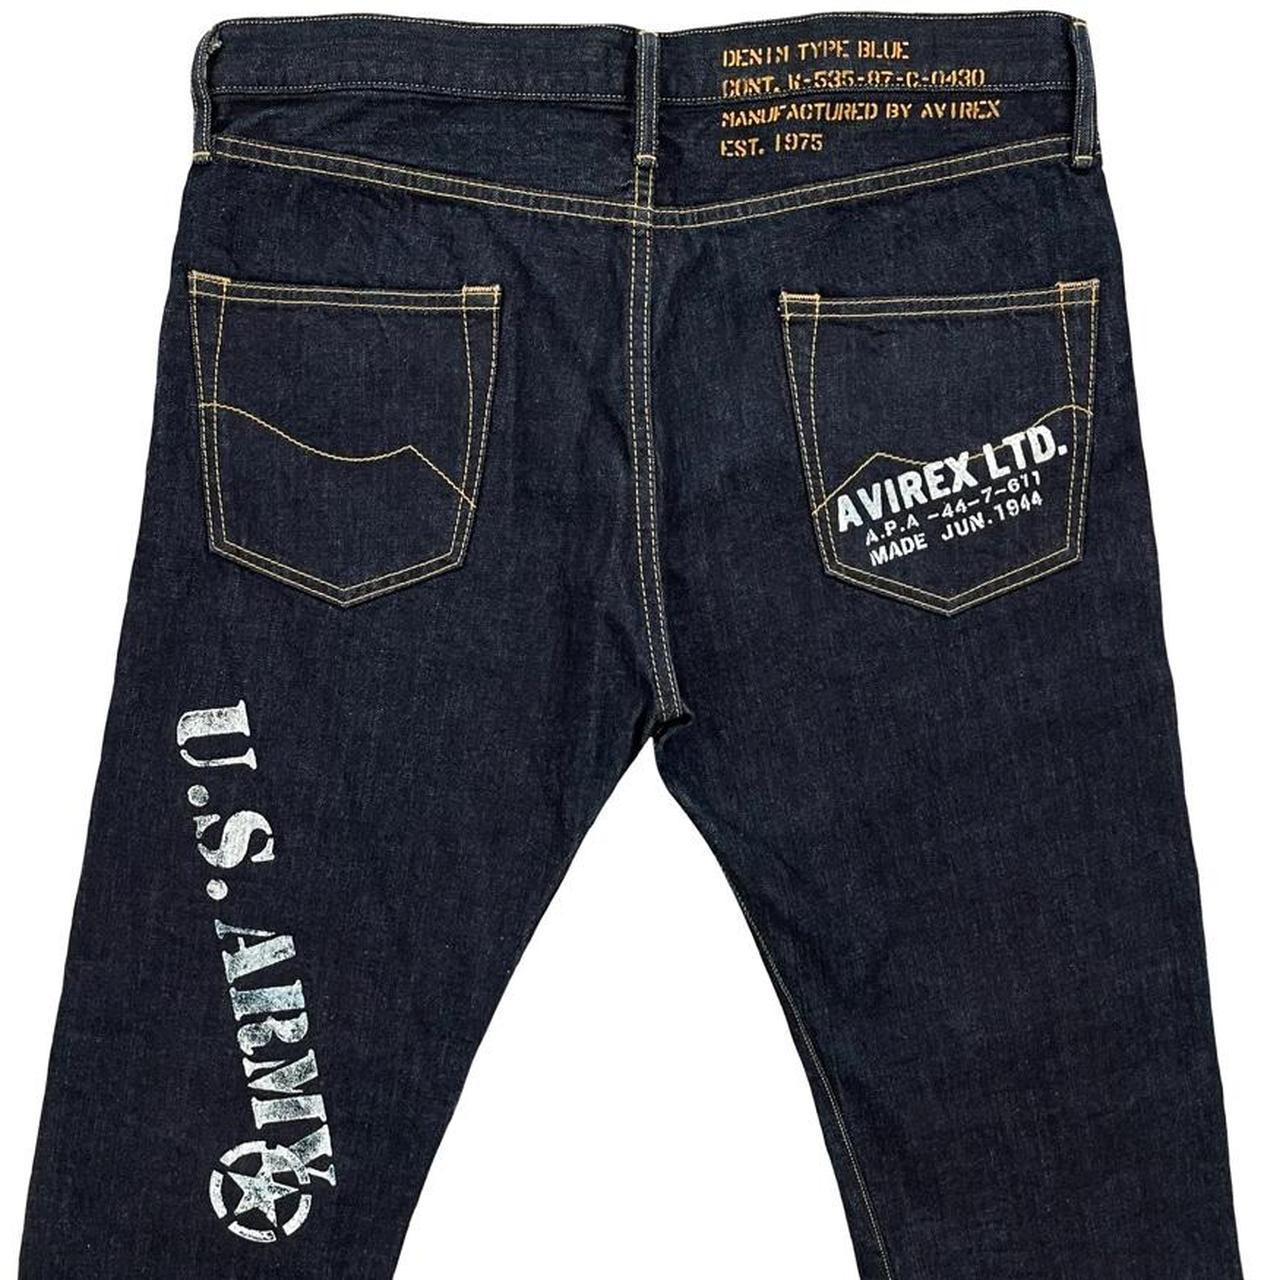 Avirex Jeans - Known Source